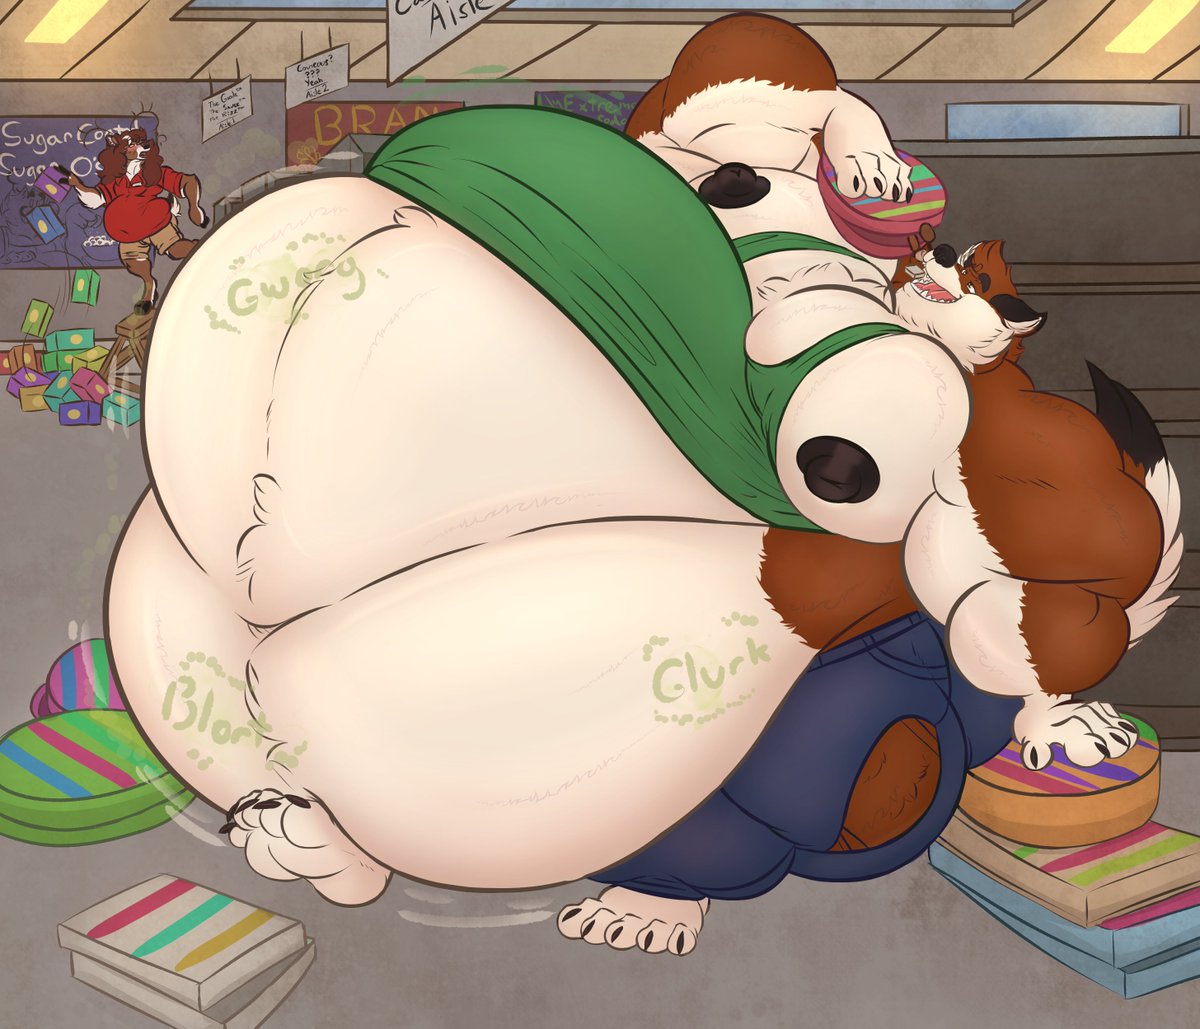 A Piece for @/BigBadBrett ! When all that leftover candy just doesn't sell, SOMEONE has to come in and eat it all. Though I don't think he particularly minds.